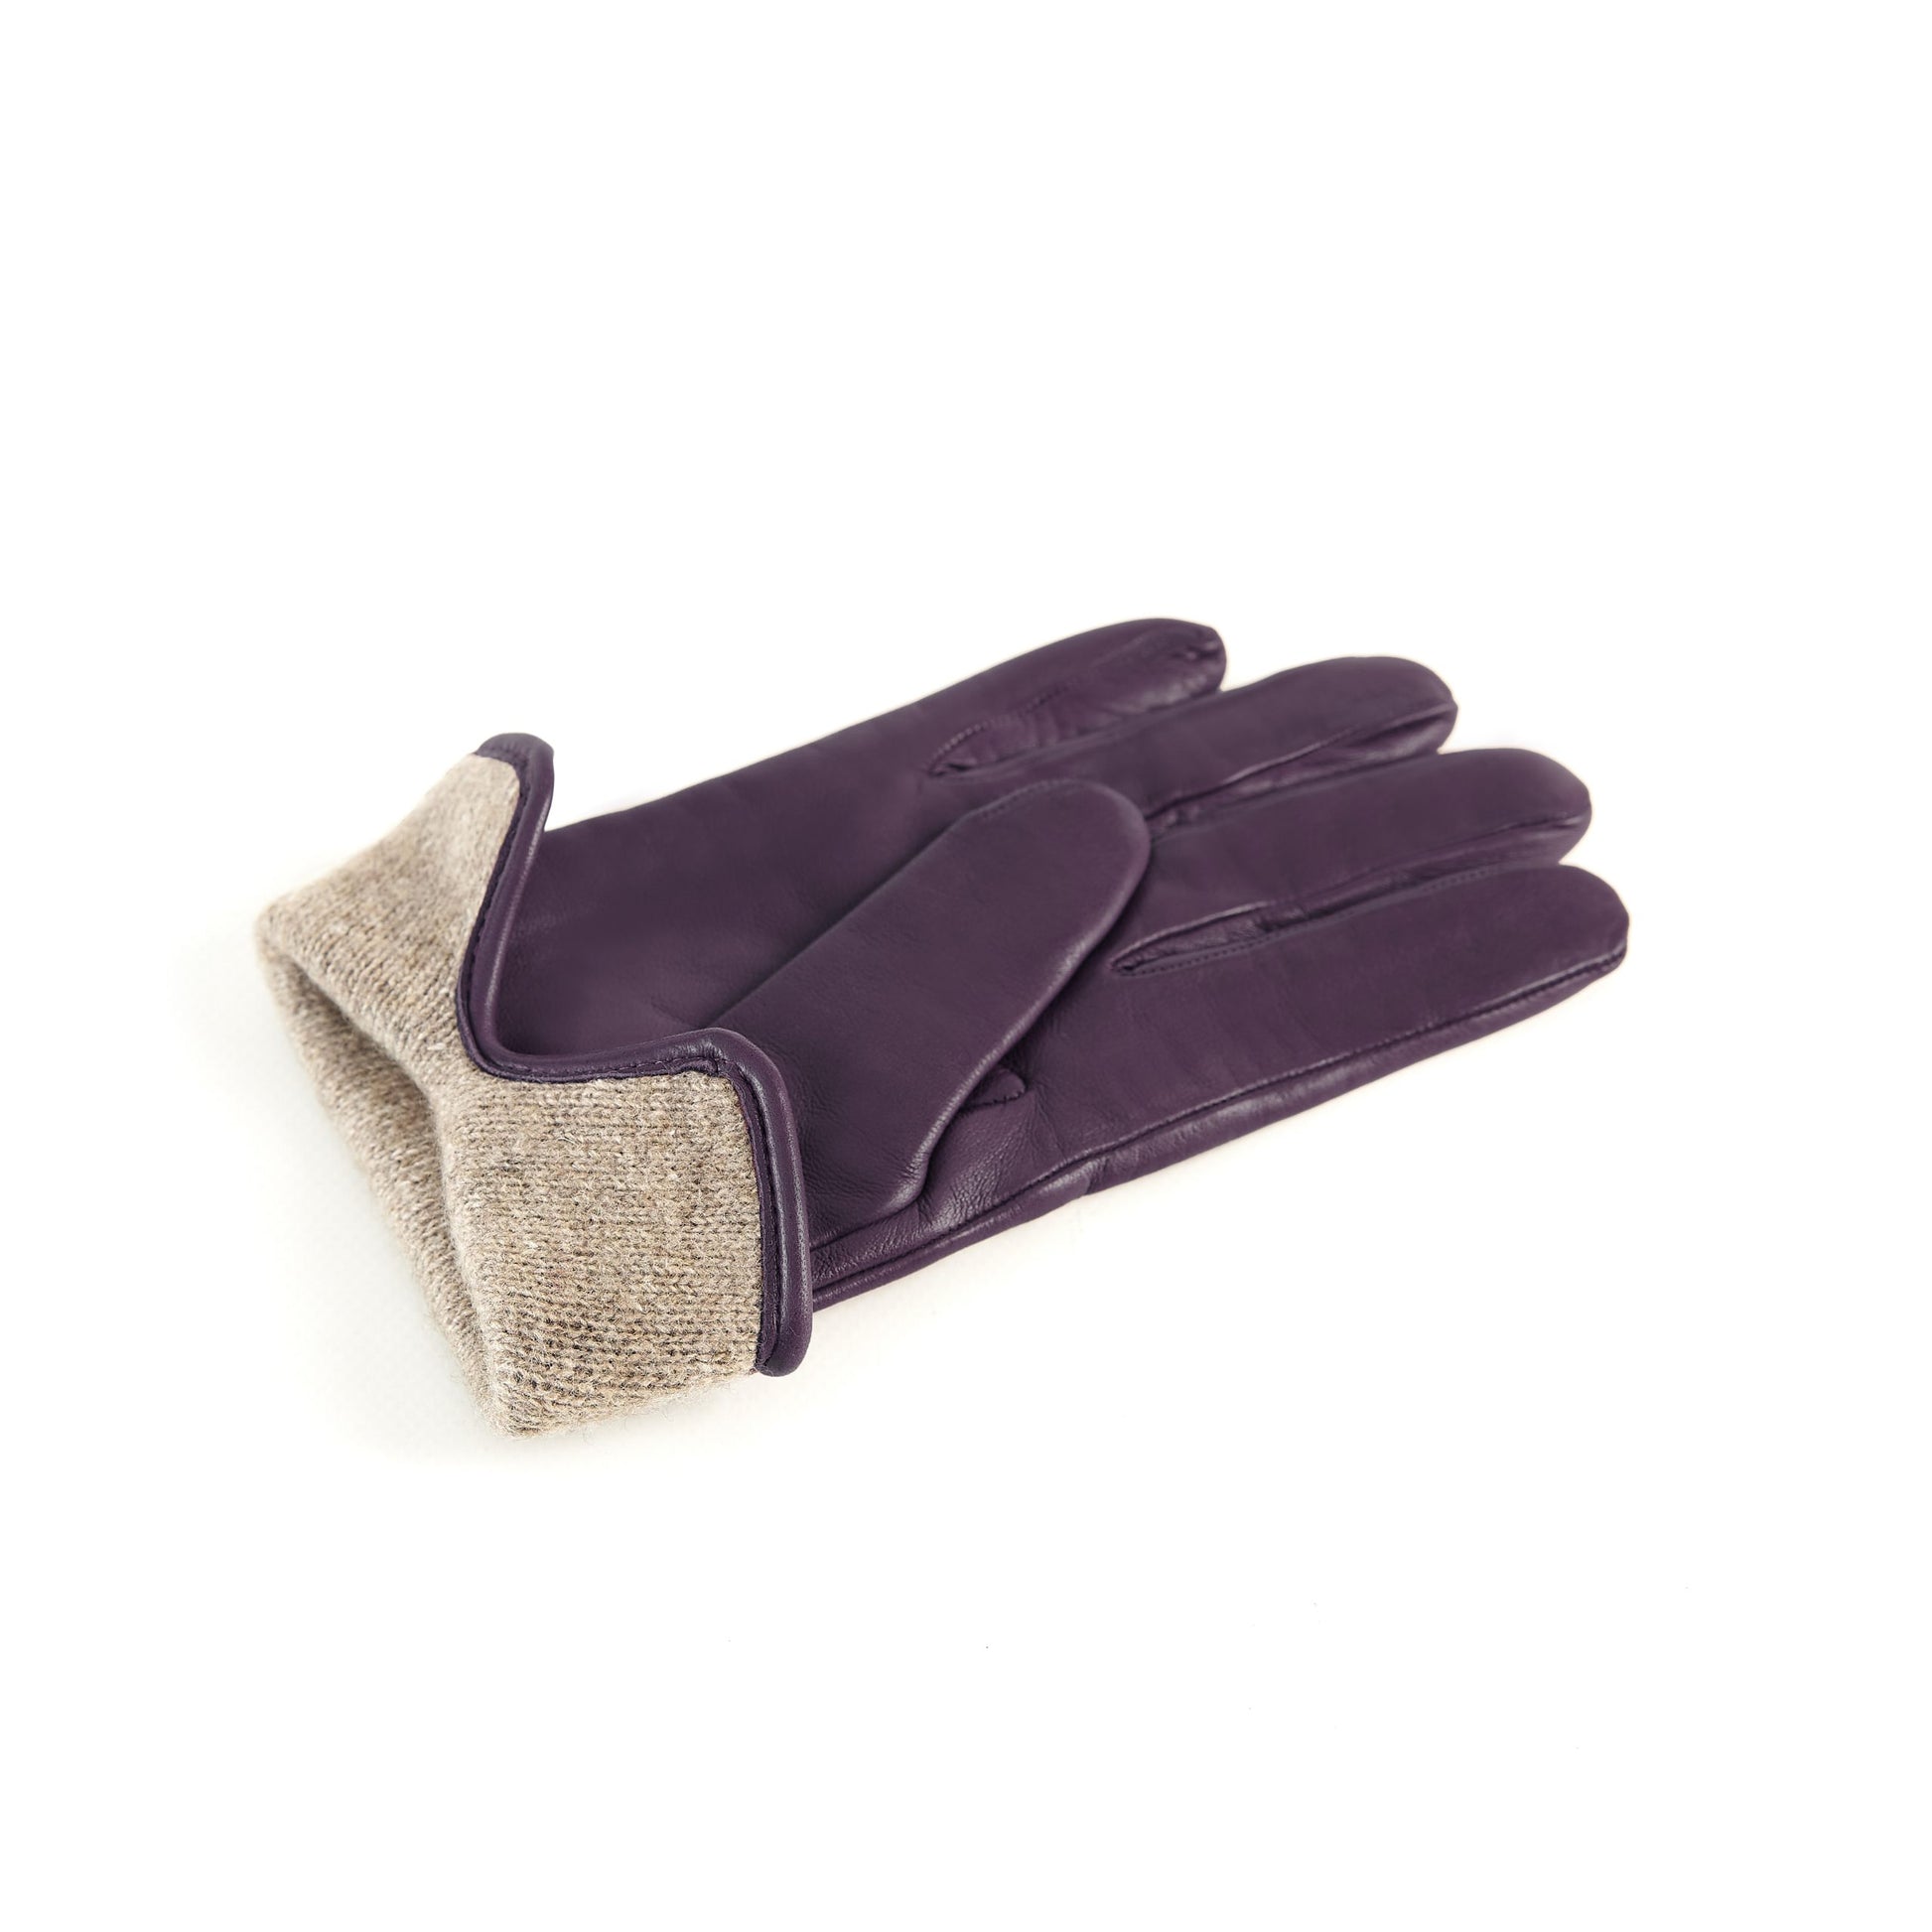 Women’s basic purple soft nappa leather gloves with palm opening and mix cashmere lining